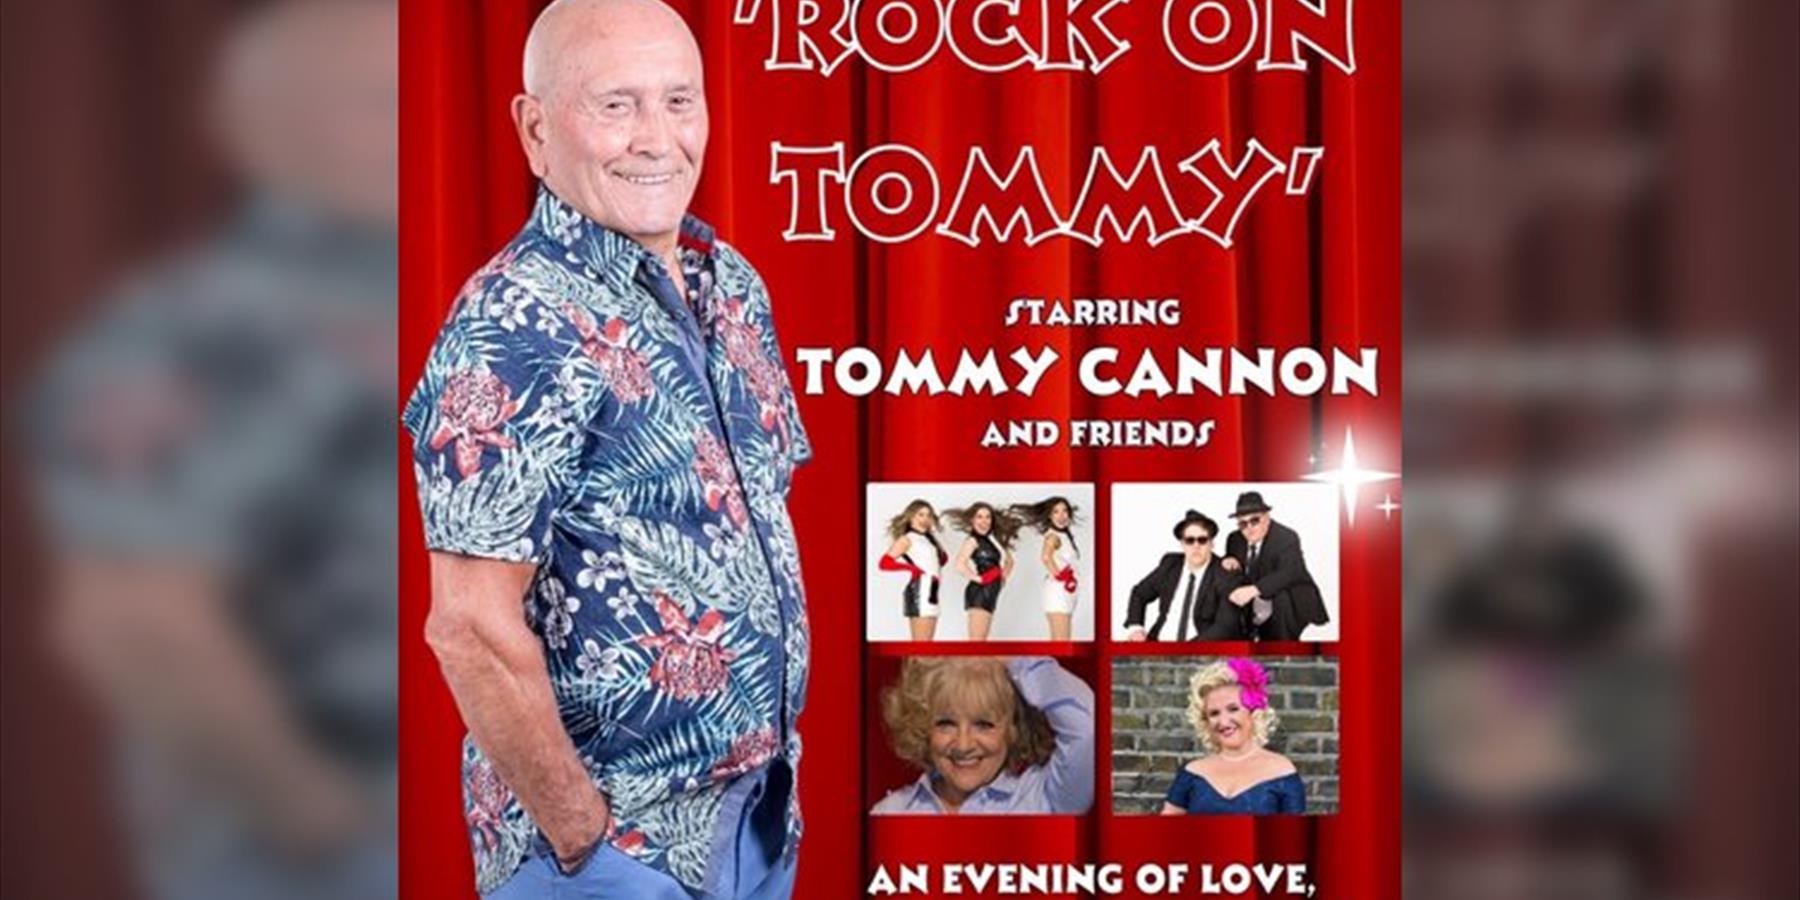 Rock On Tommy - An Evening with Tommy Cannon